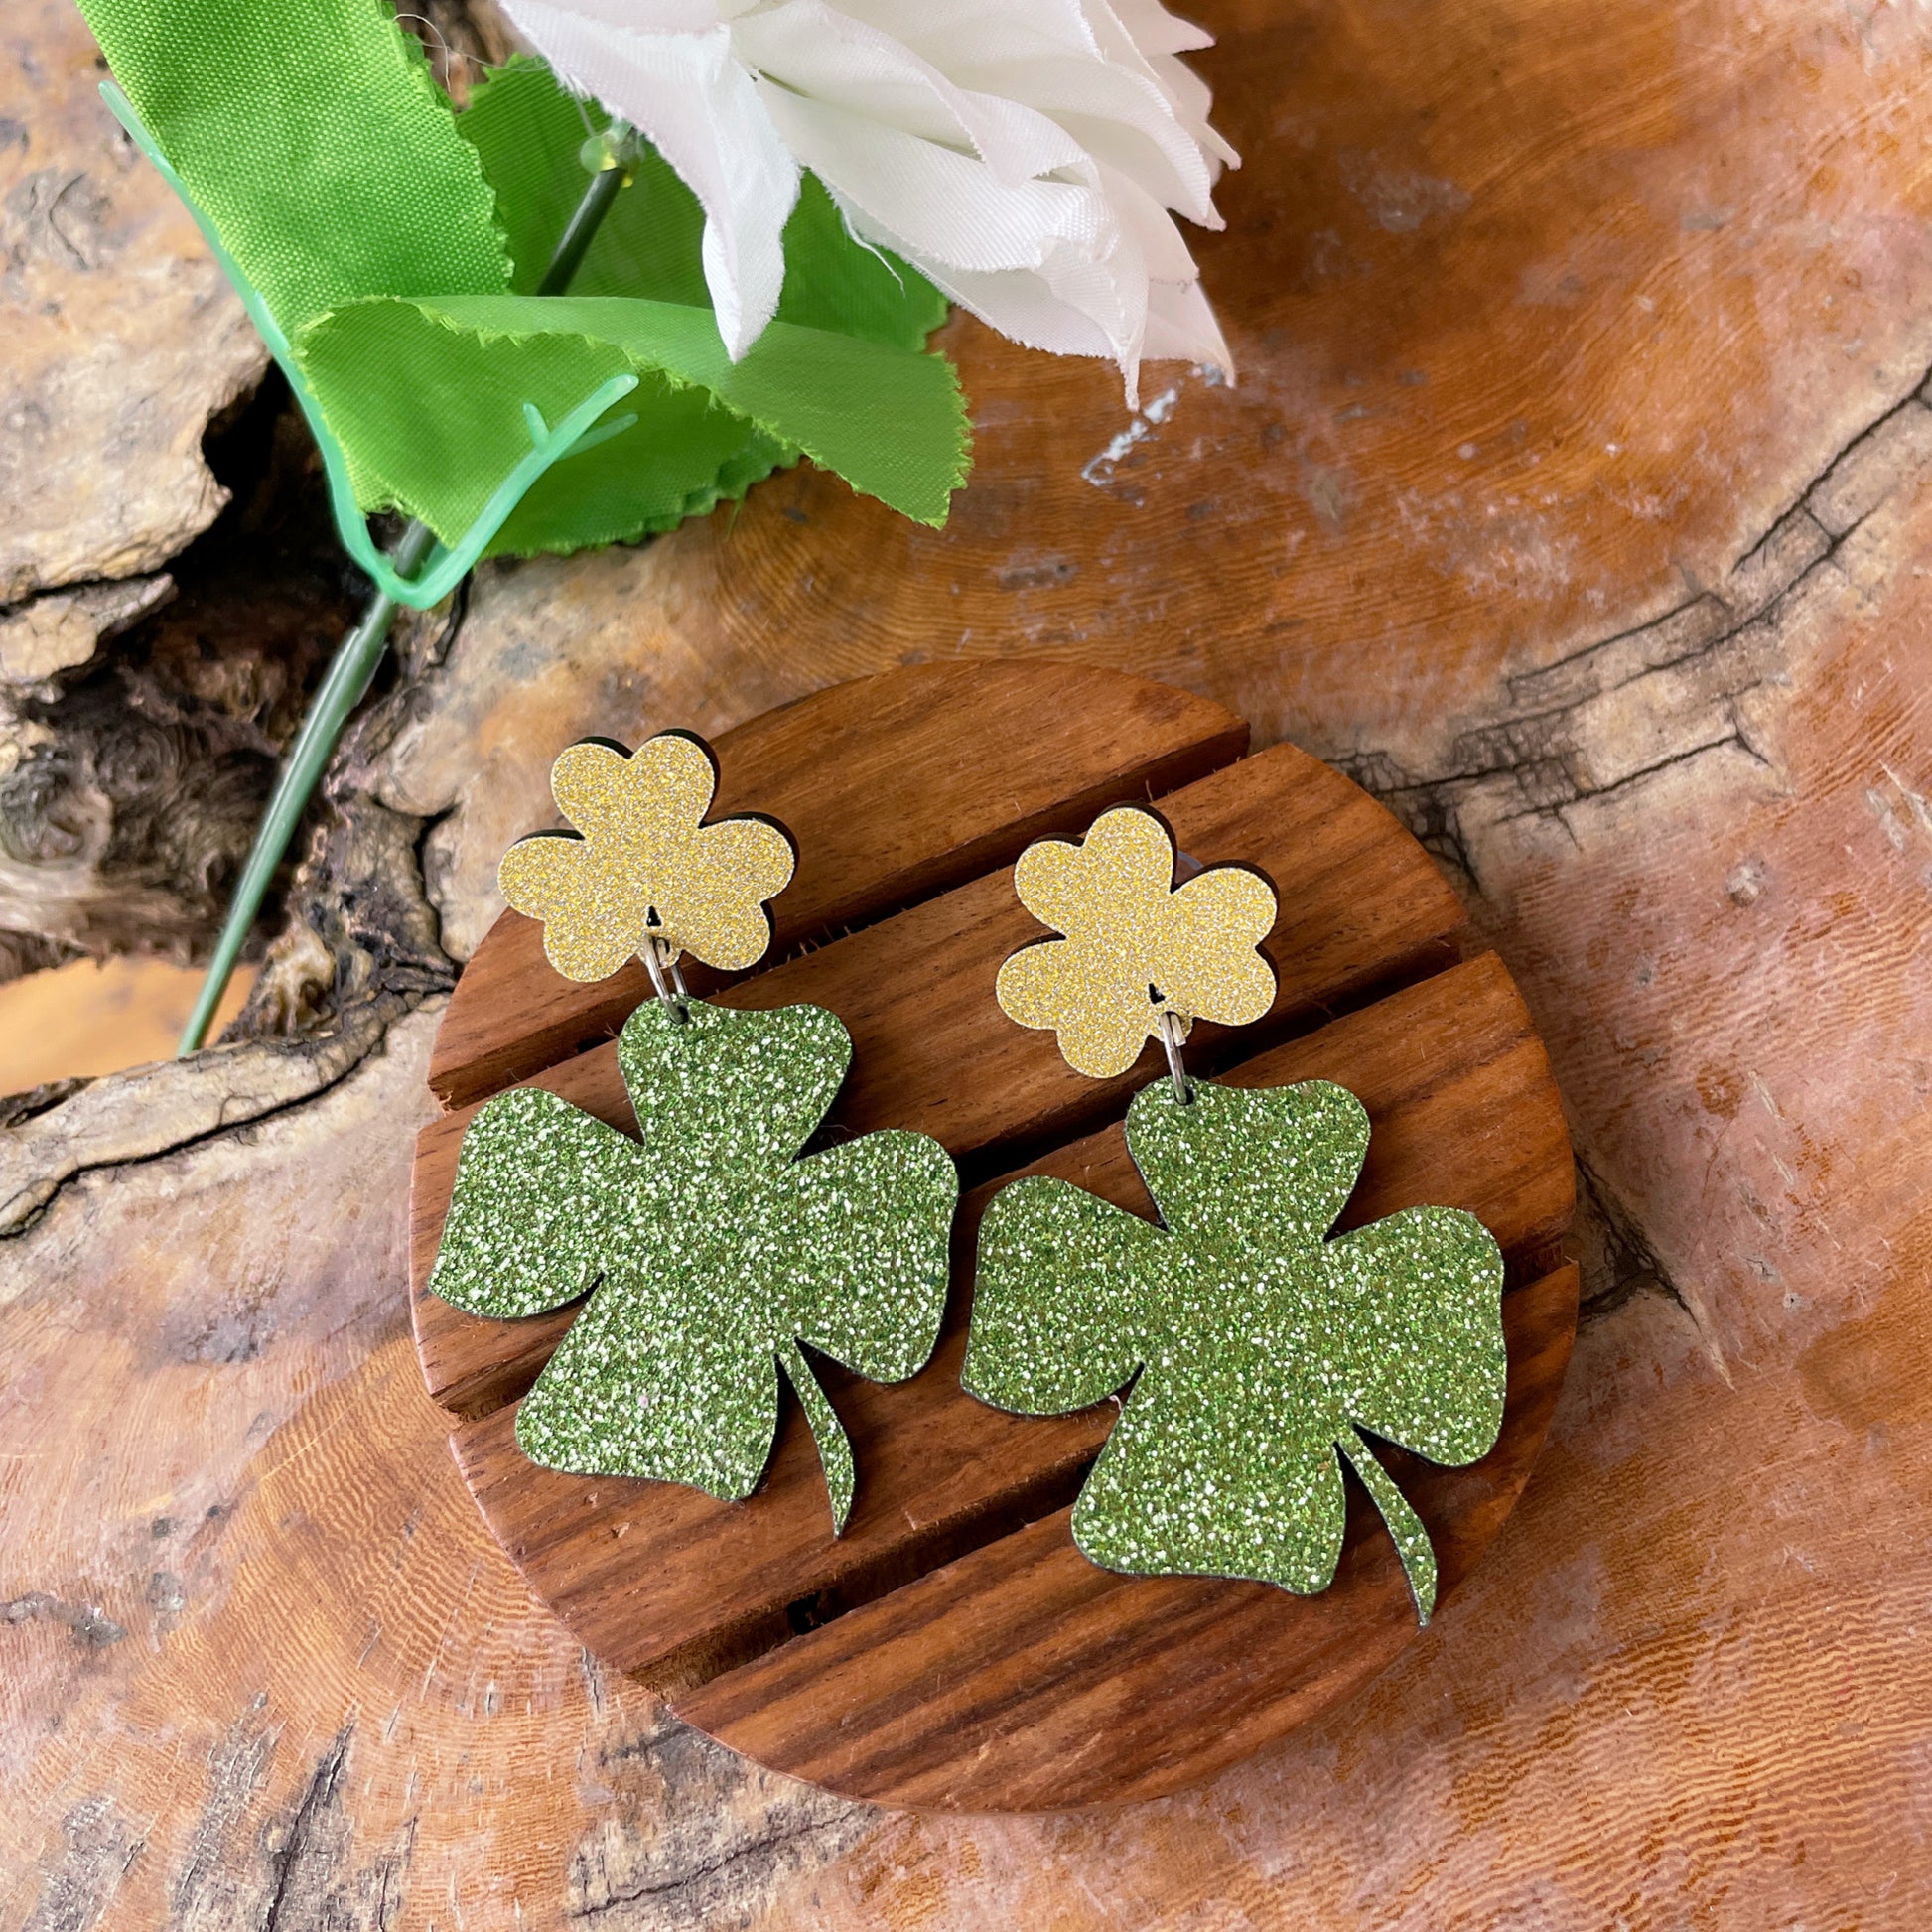 Clover Earrings - Green and Golden - Nian by Nidhi - in a white and brown background